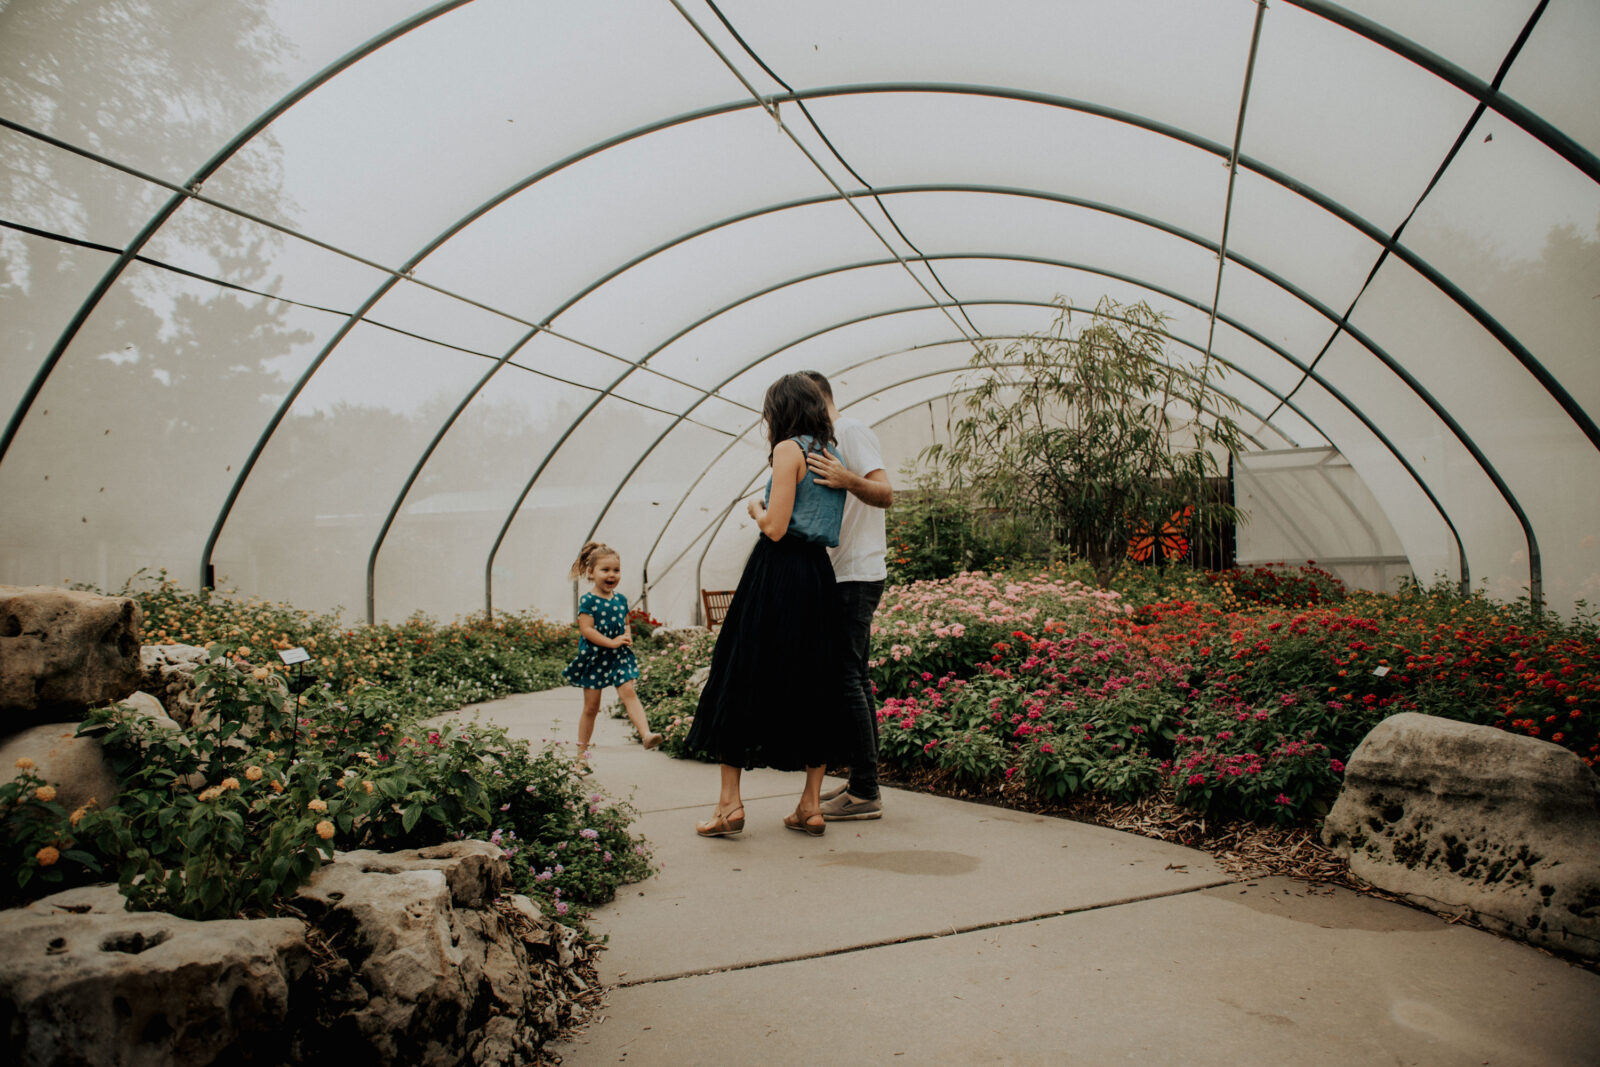 A family in the butterfly garden at botanica gardens